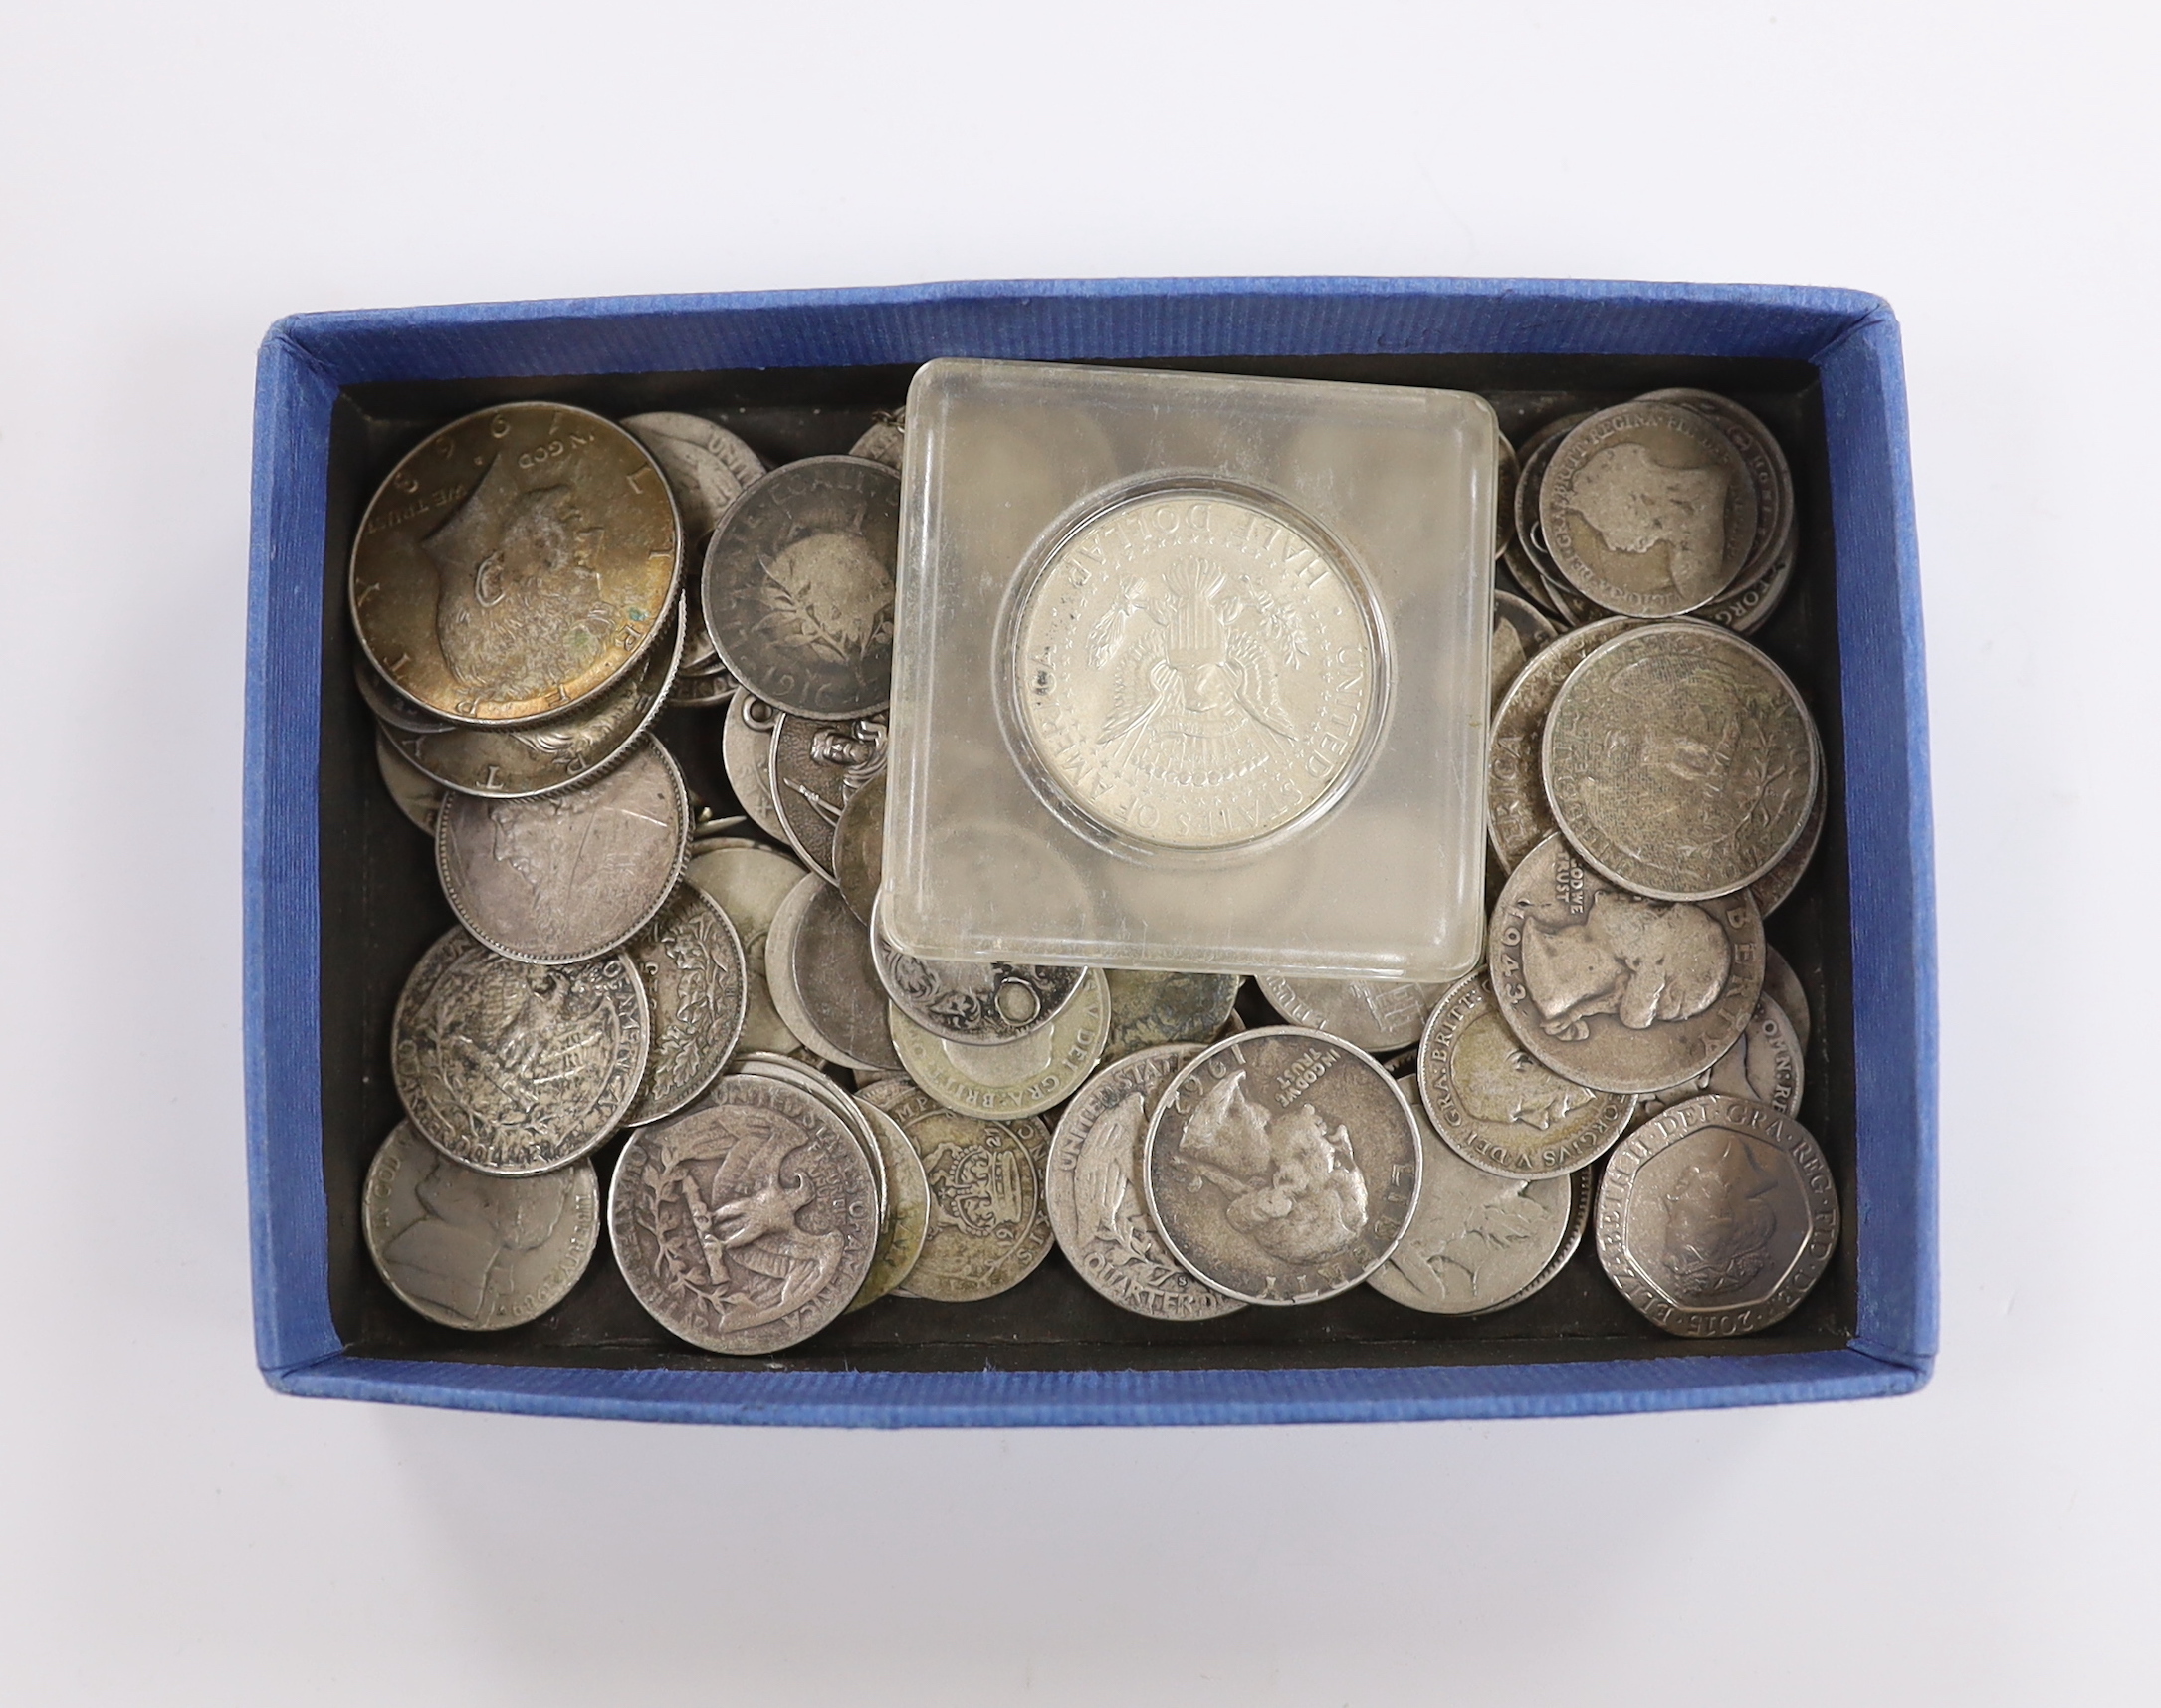 A collection of coins, mainly mid-20th century U.S. coins, some 19th century coins, including drilled Maundy money, etc.